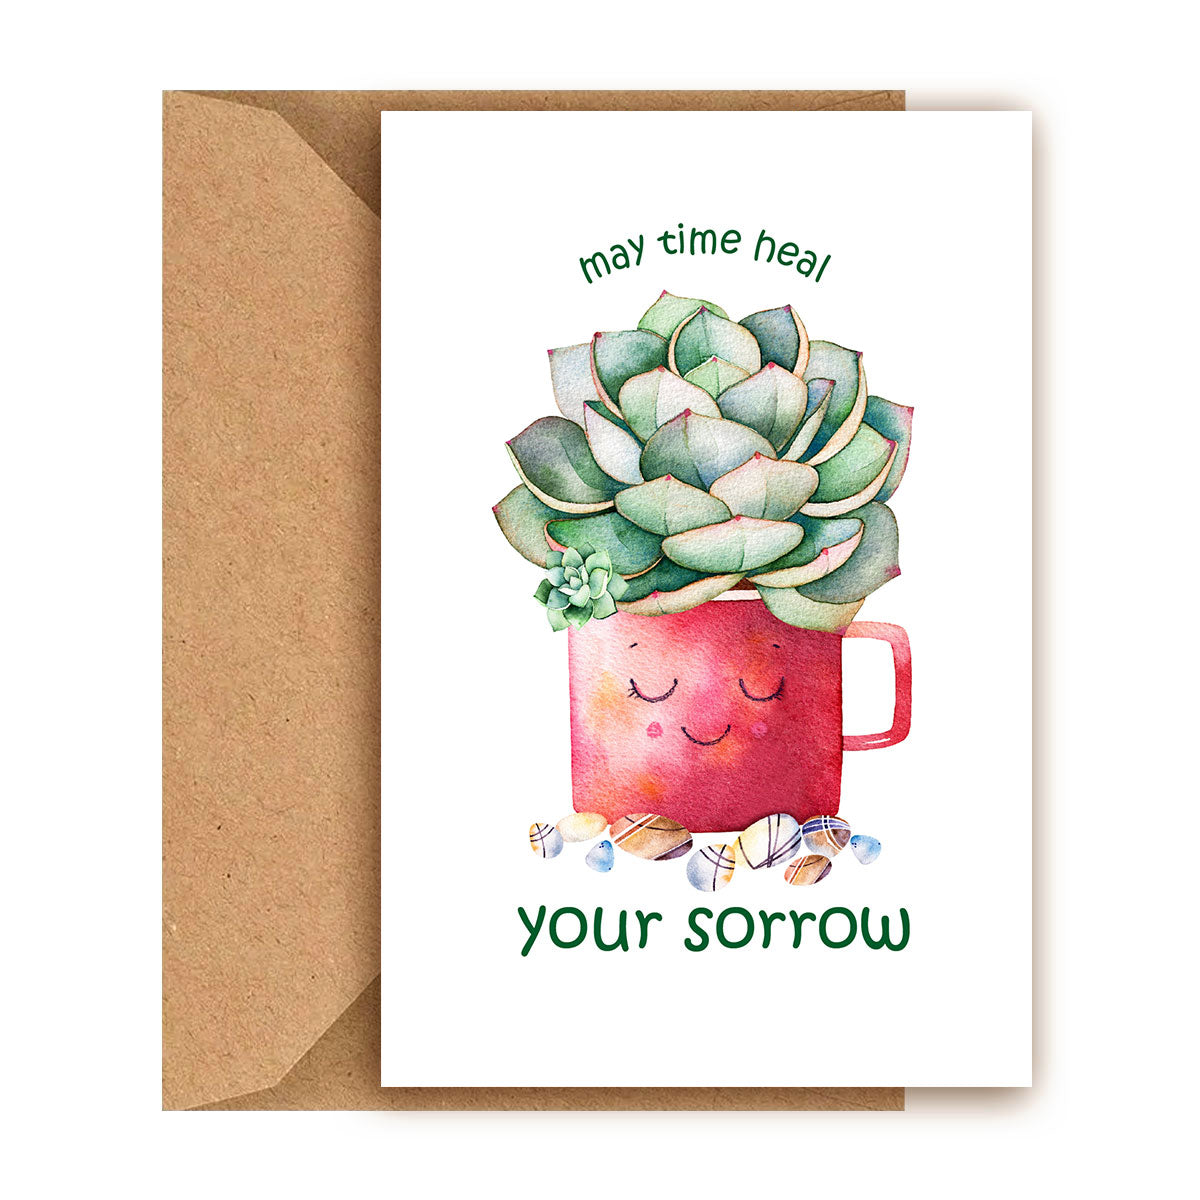 Succulent Card for sale, Cactus Greeting Card, Succulents Greeting Card, Succulents Gift Ideas, Echeveria Your Sorrow Card for sale, Mother's day cards 2023,  Mother's Day card ideas, Succulent mom card